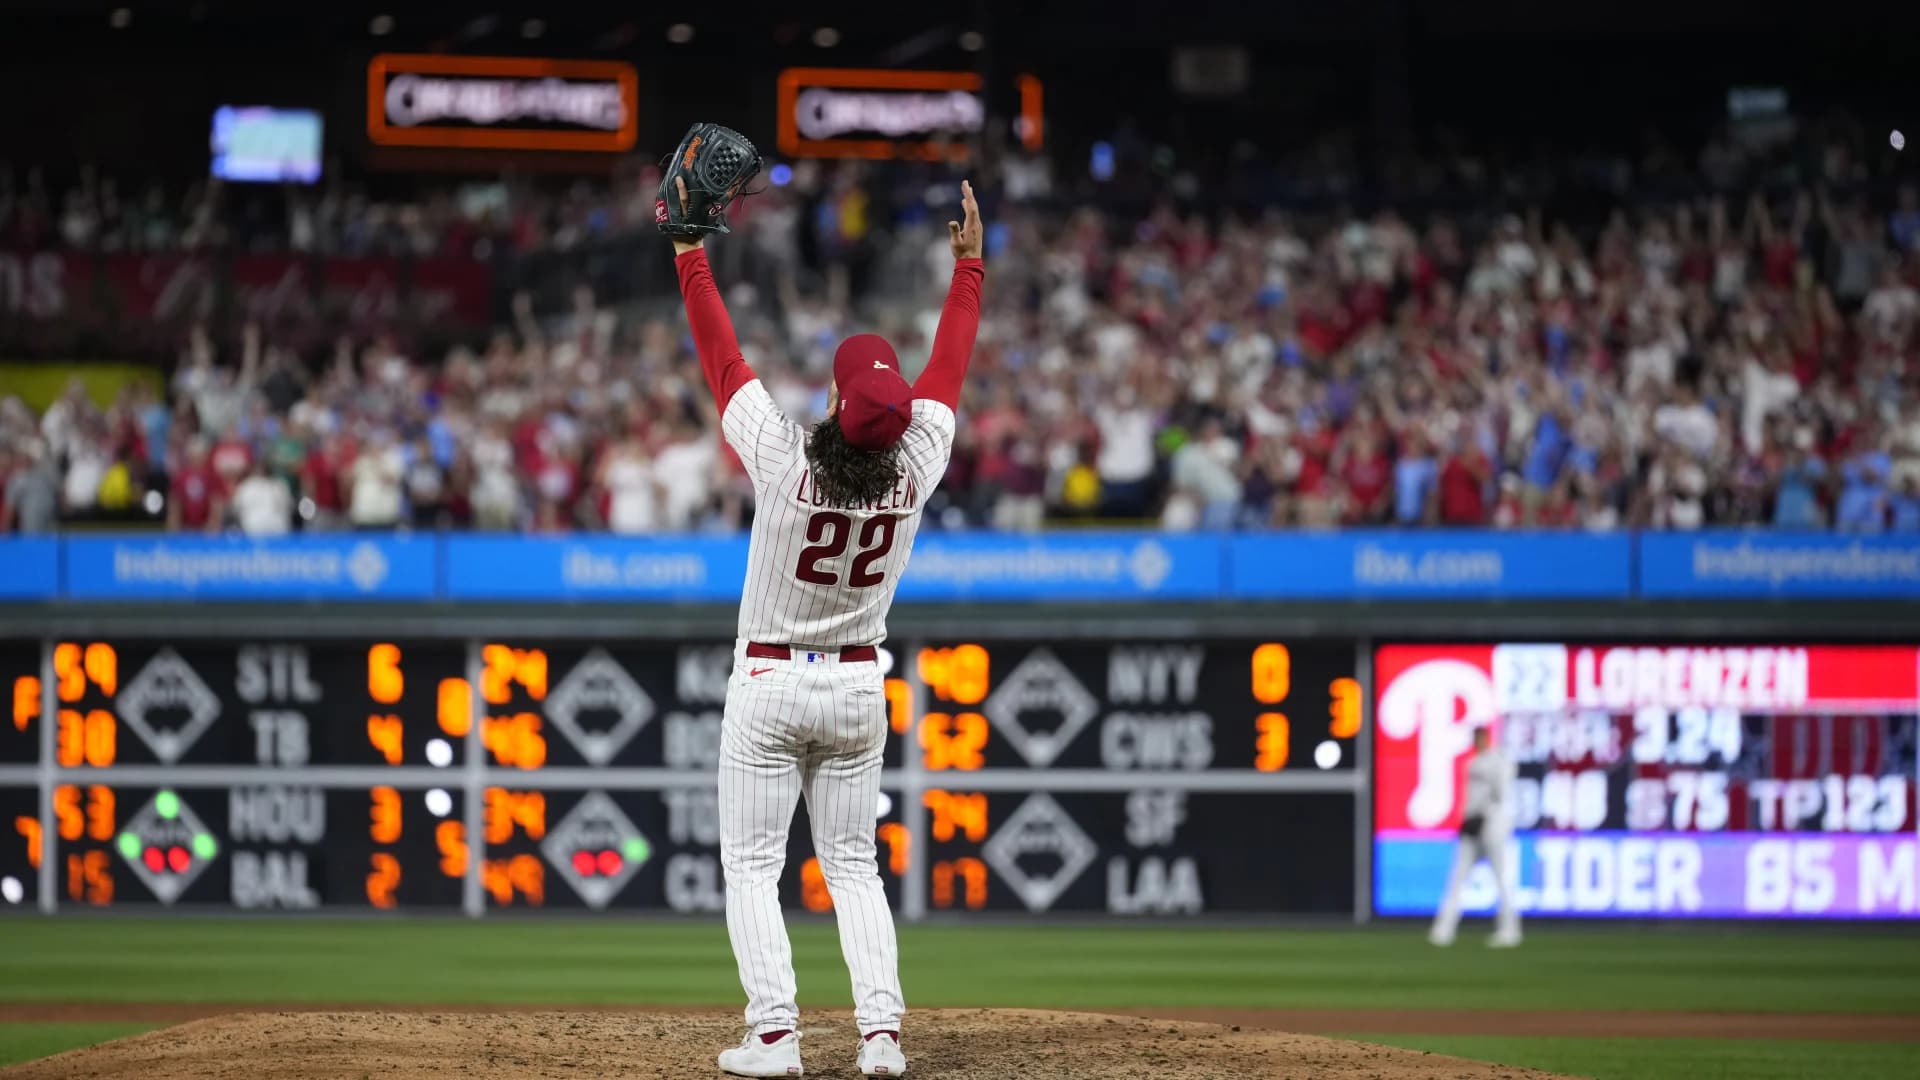 Michael Lorenzen throws no-hitter in home debut with the Phillies, 14th in franchise history